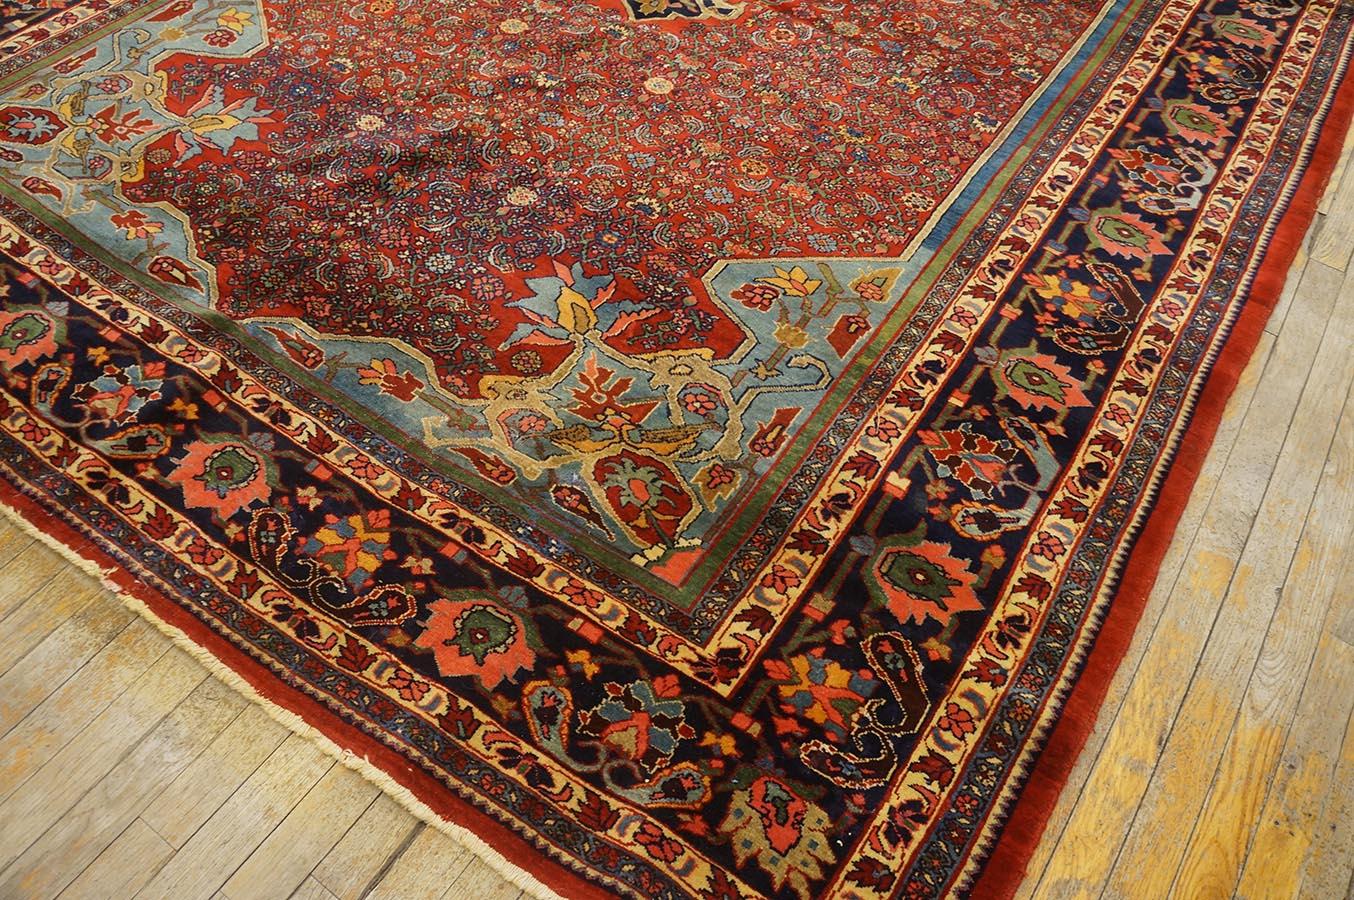 Hand-Knotted Early 20th Century Persian Bijar Carpet ( 7'6